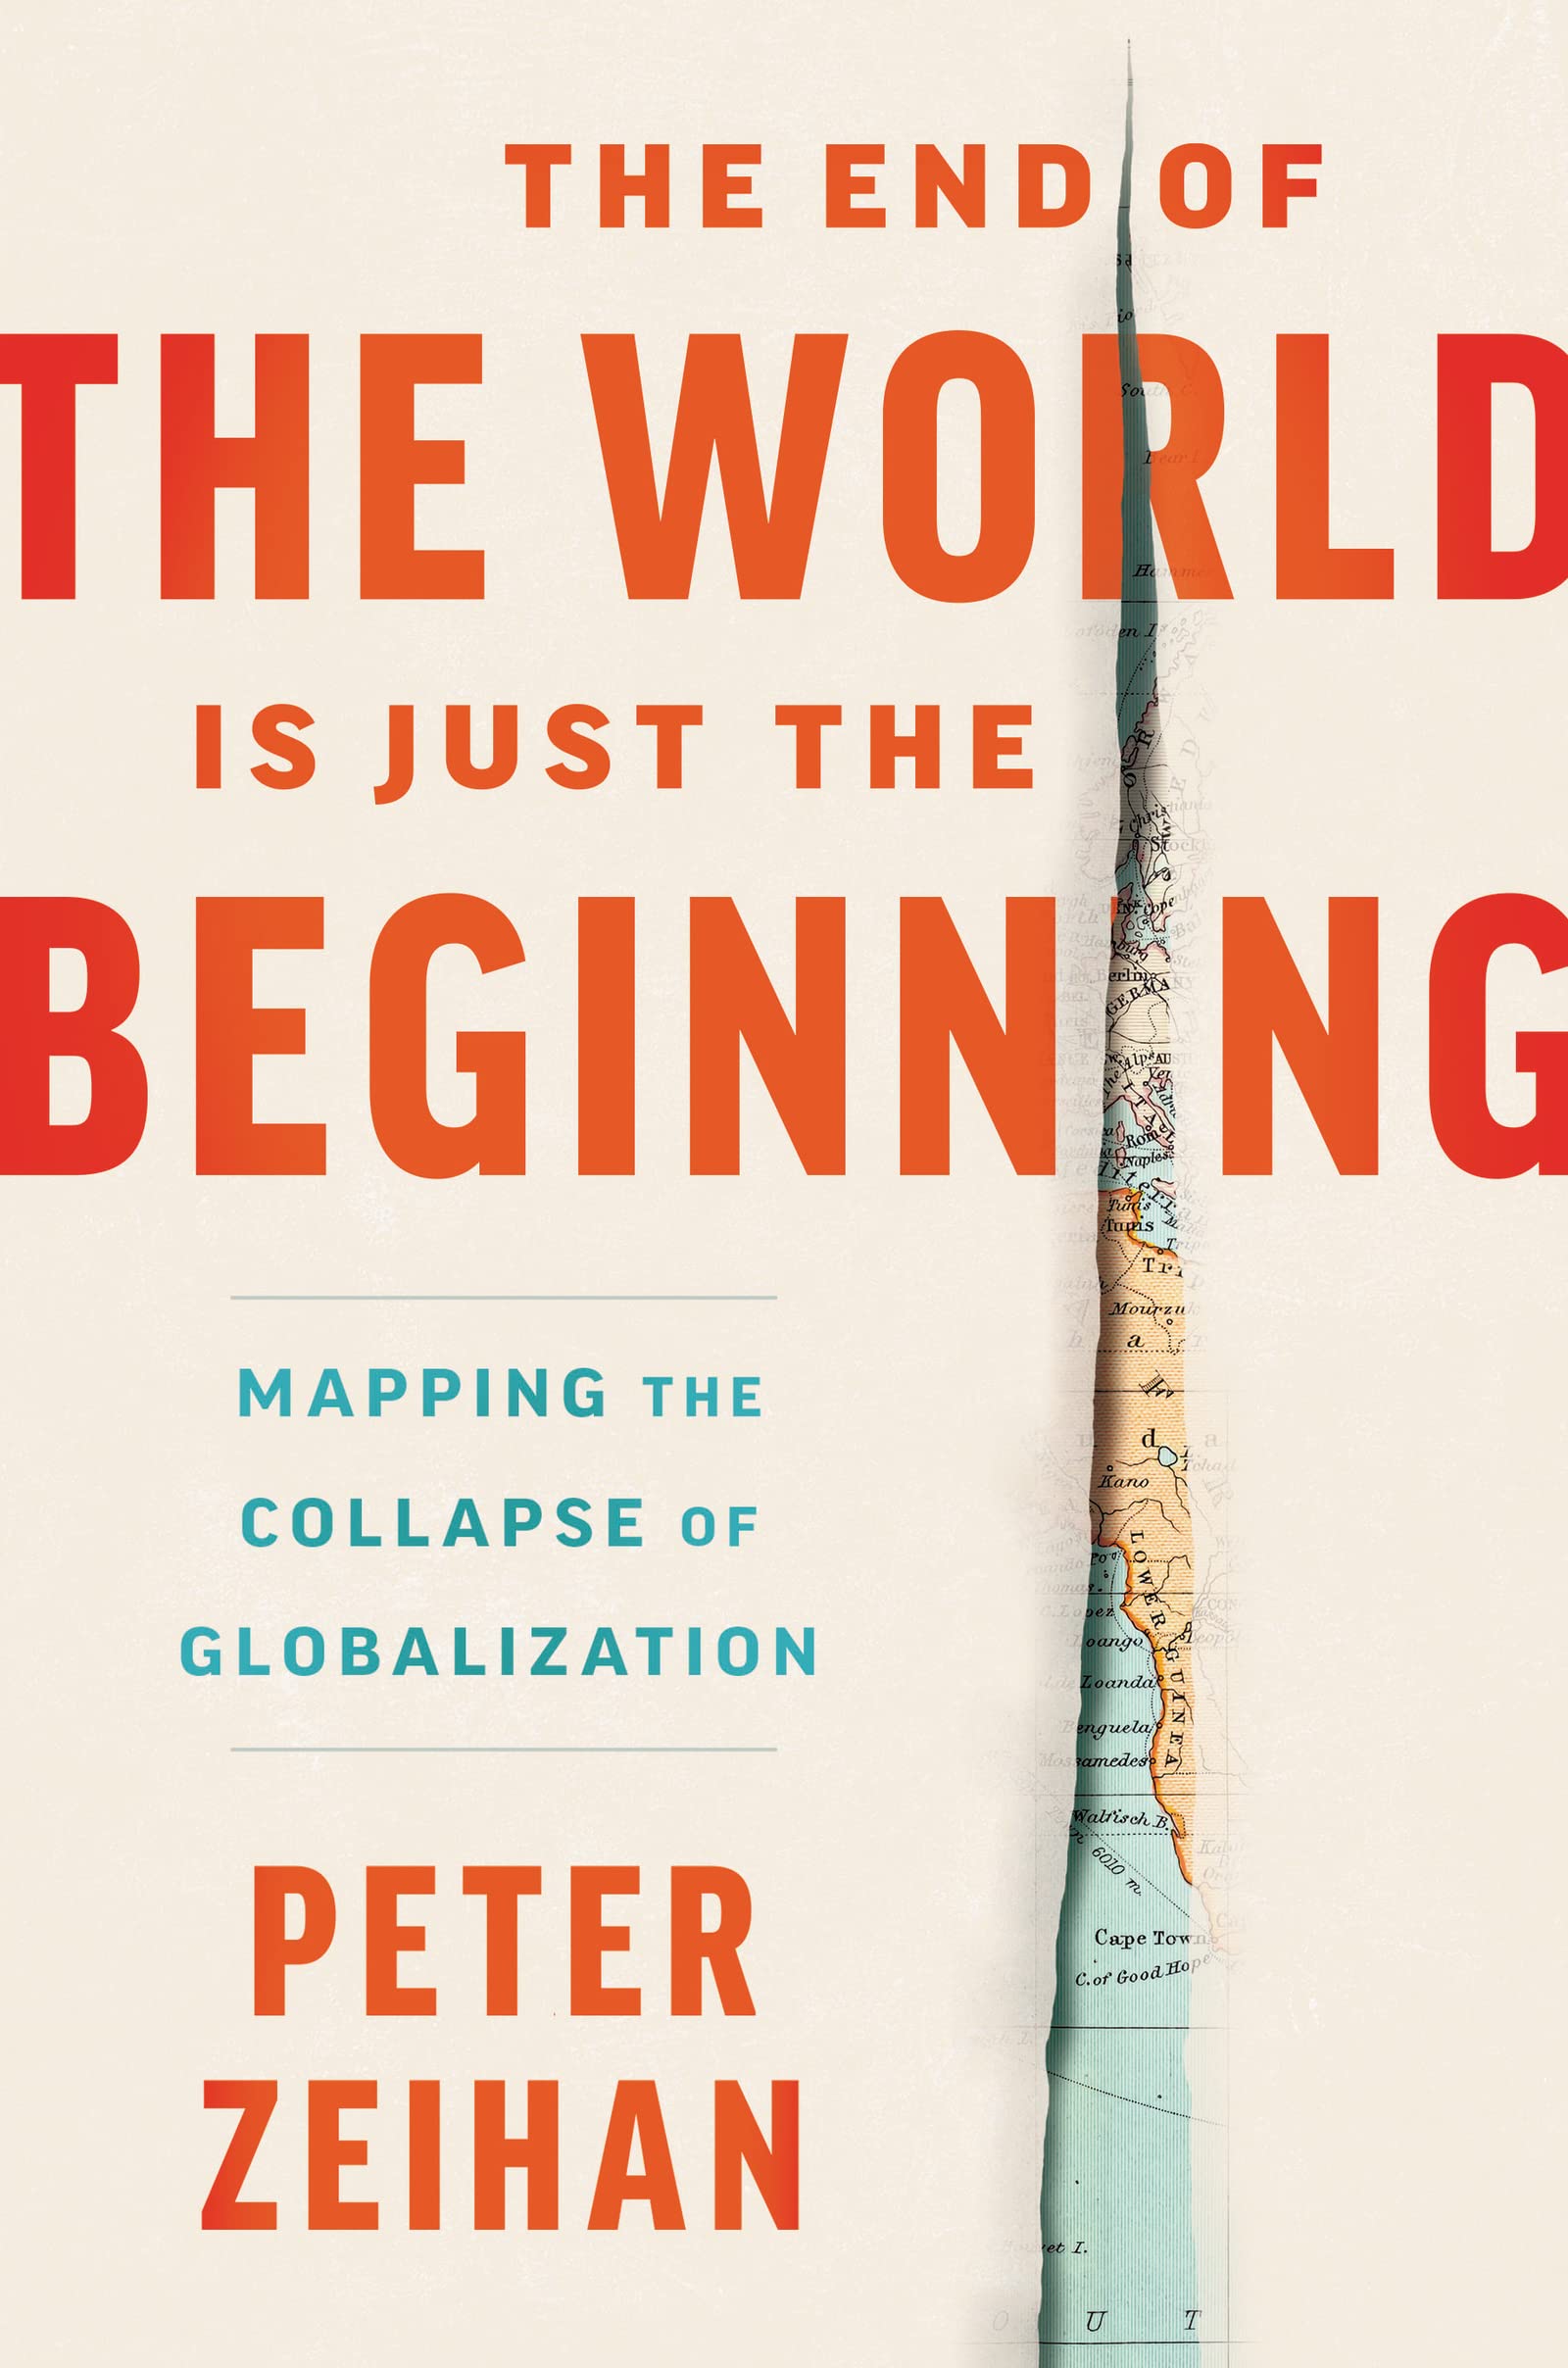 The End of the World is Just the Beginning: Mapping the Collapse of Globalization (eBook) by Peter Zeihan $1.99